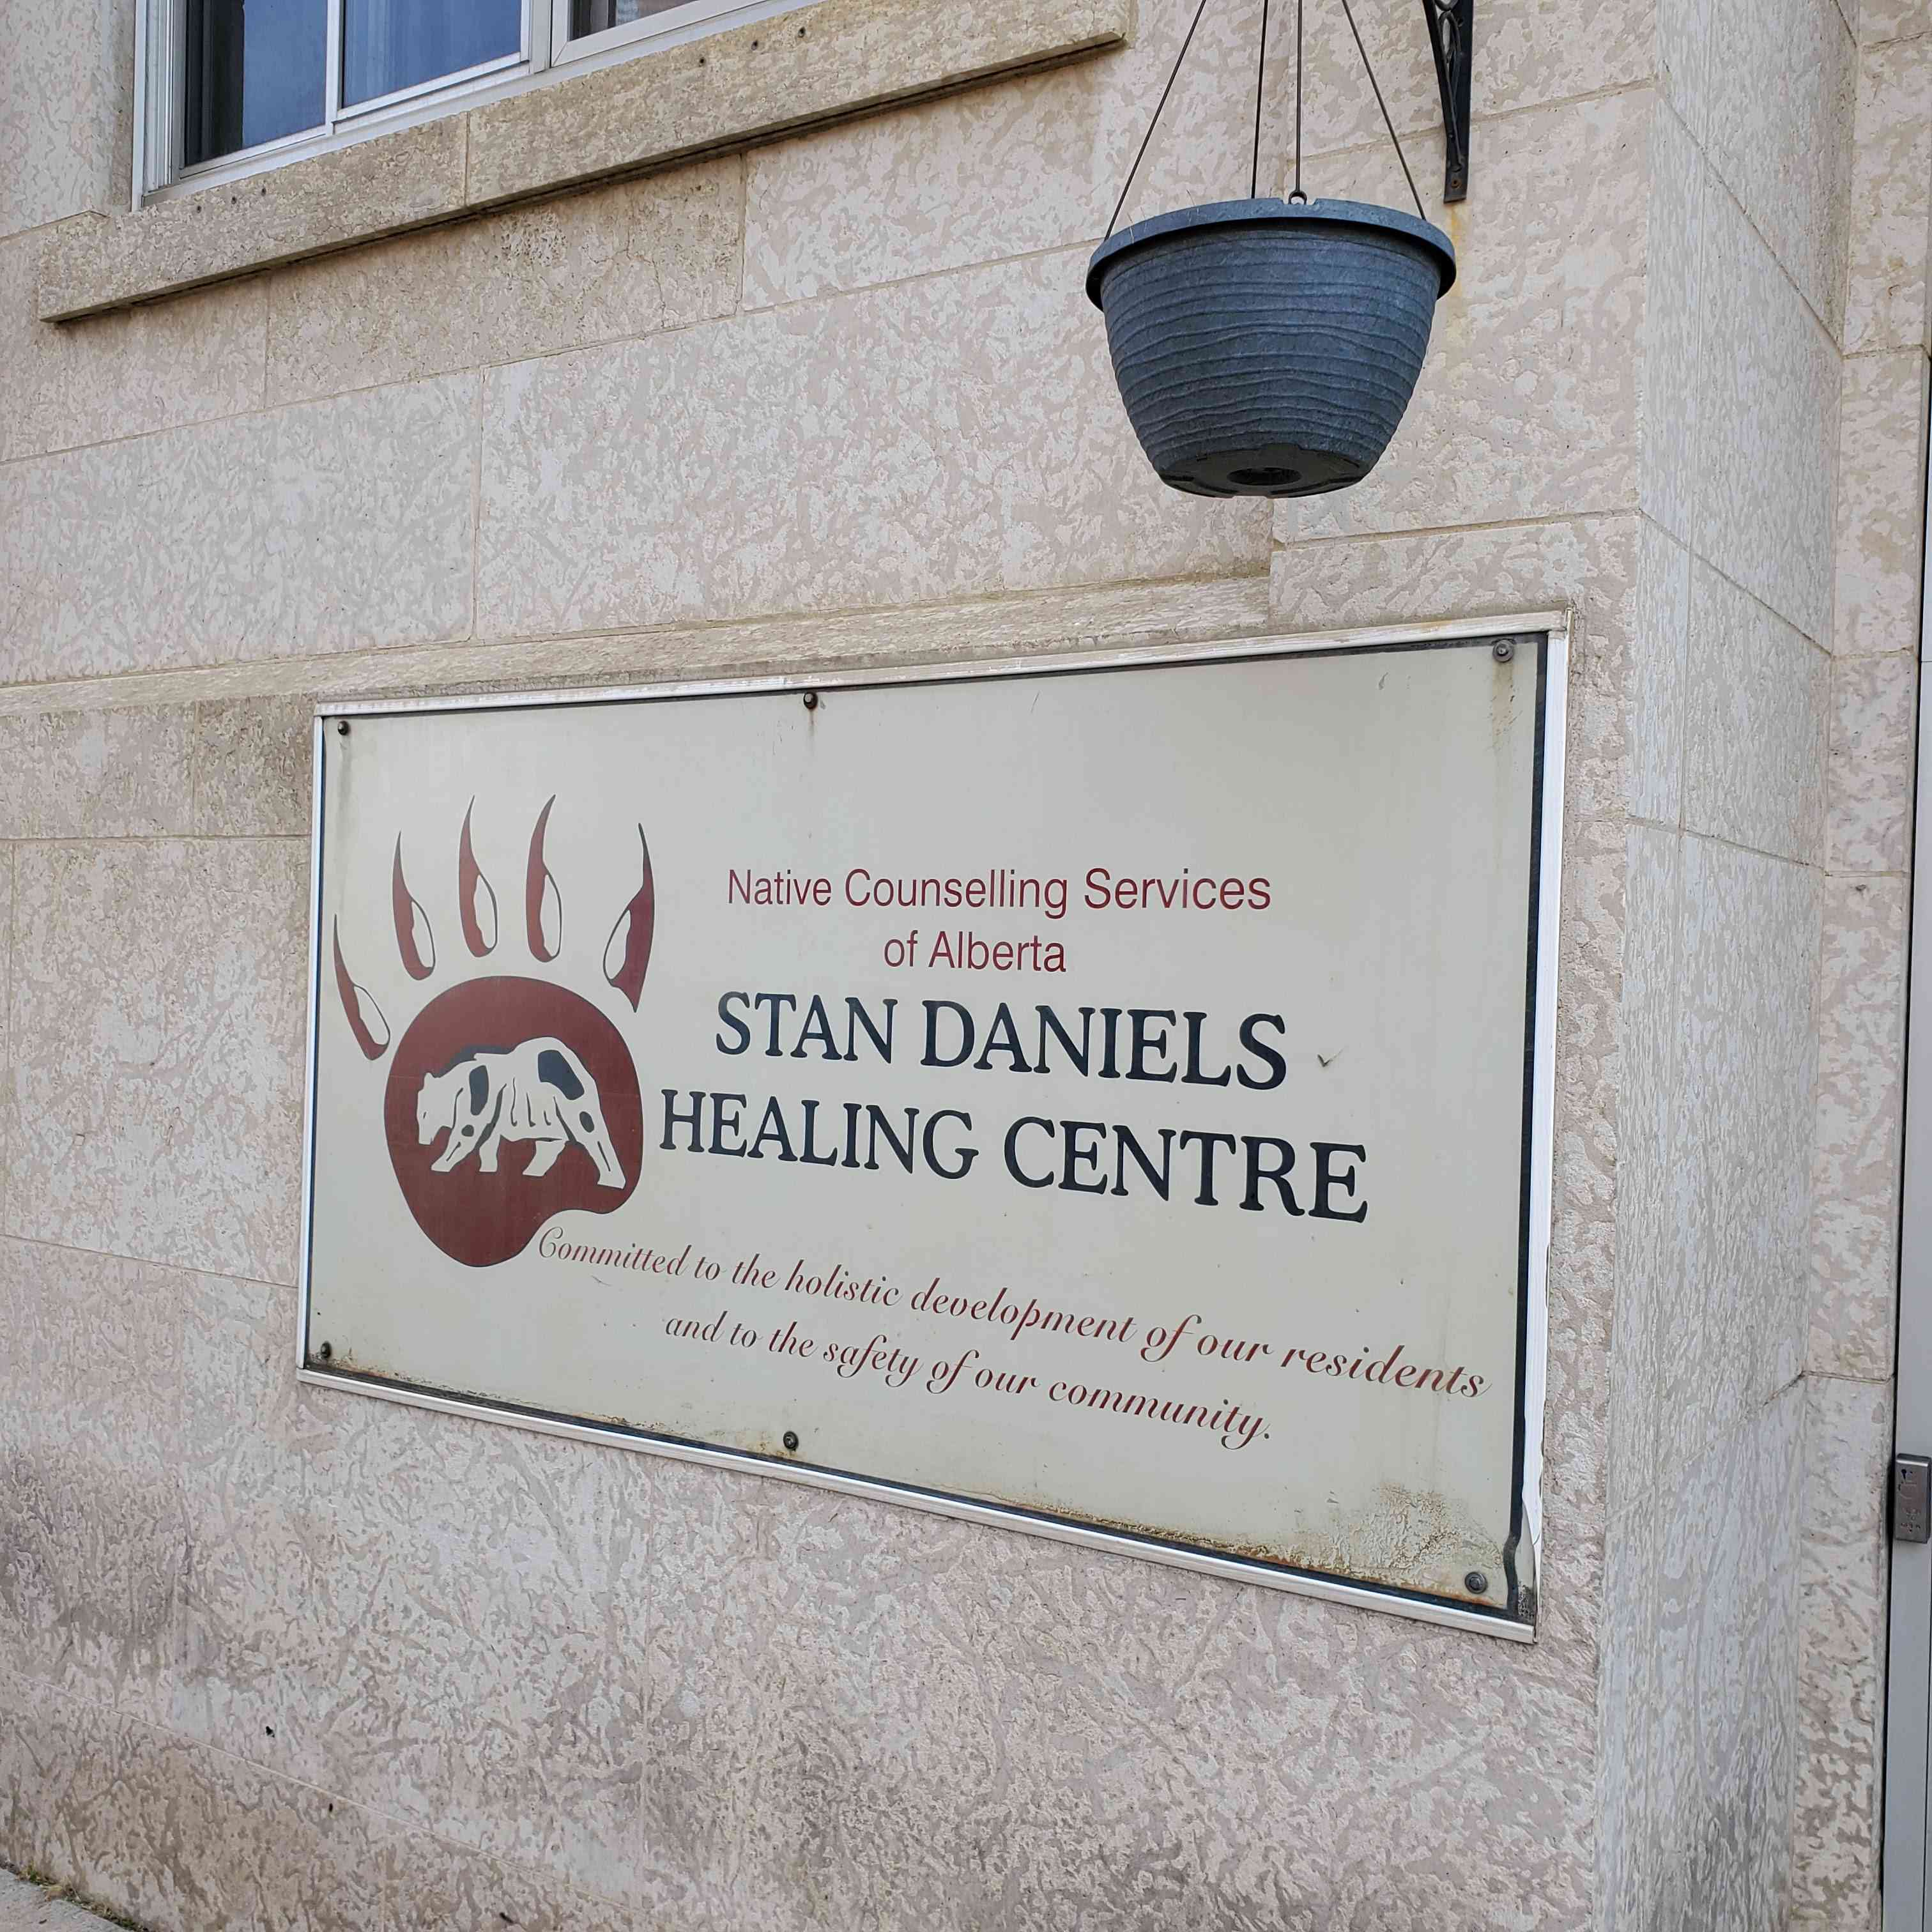 Photo of the exterior sign at the Stan Daniels Healing Centre.